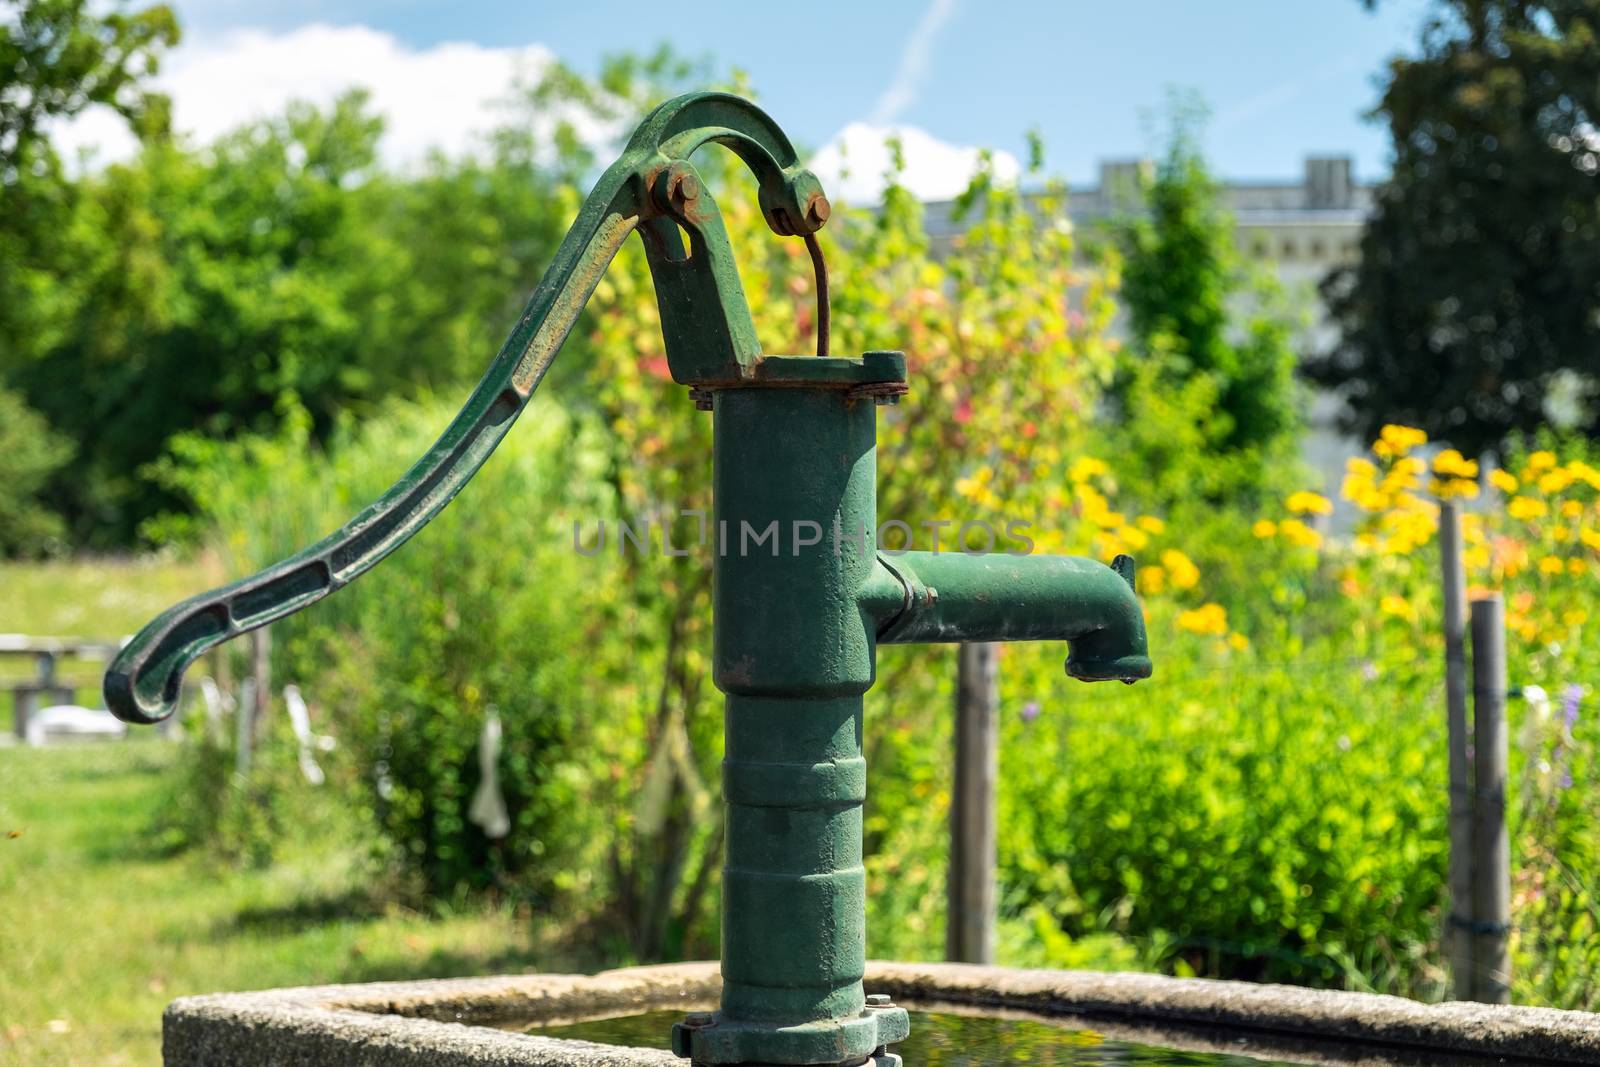 Manual water pump at Klenze Park in Ingolstadt, Germany in the summer